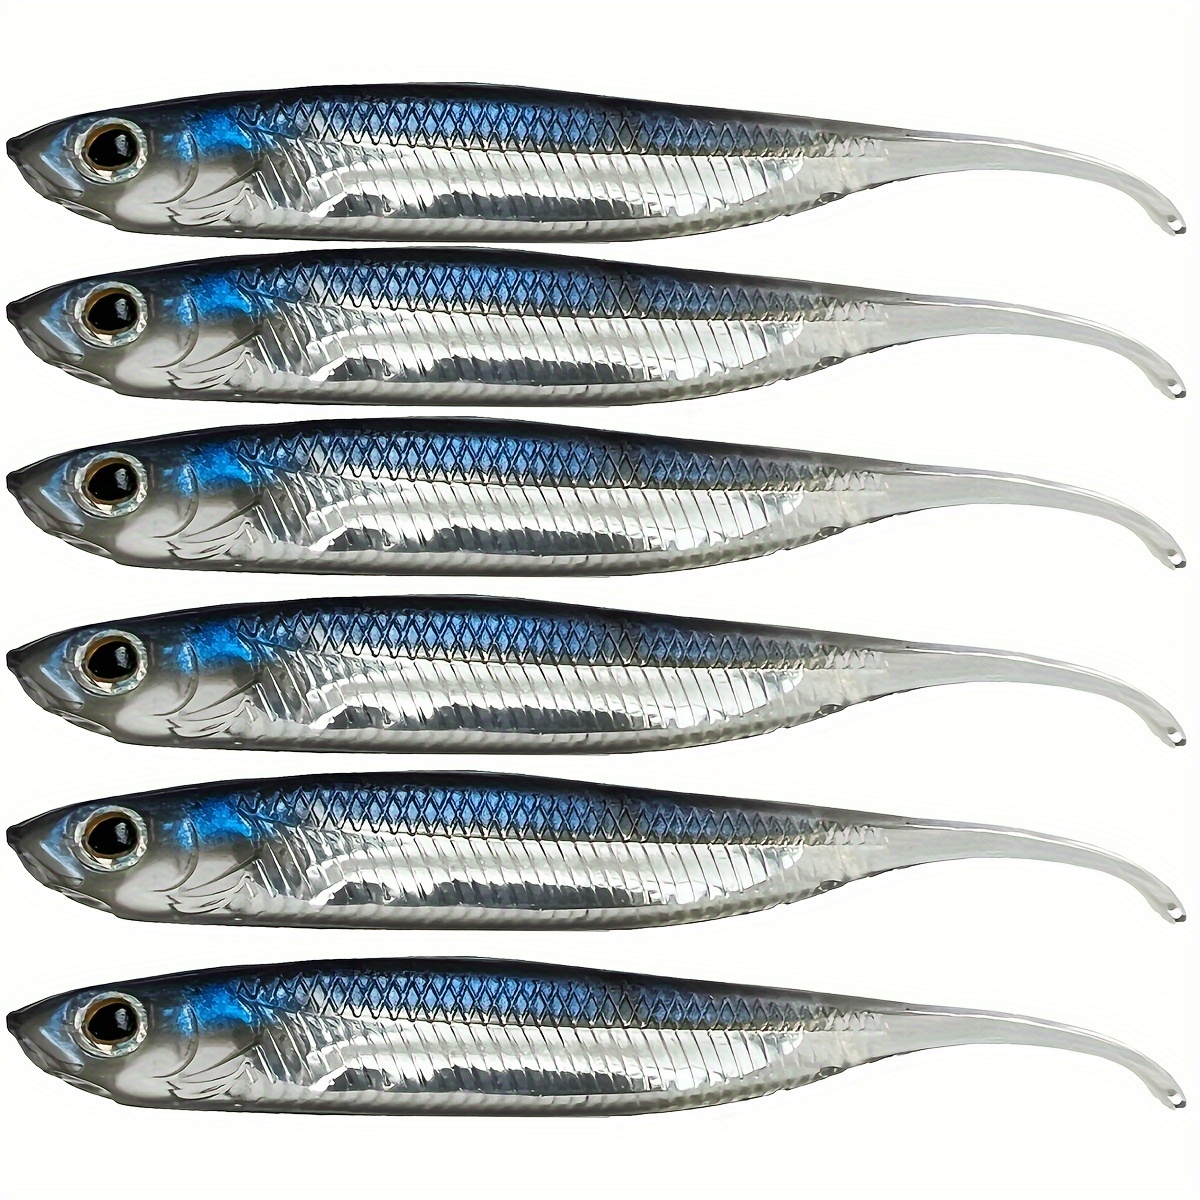 1bag 8cm/2.8g Soft Plastic Swimbait, Long Tail Swimbaits For Bass Fishing,  Rubber Minnow Lures, Fishing Accessories